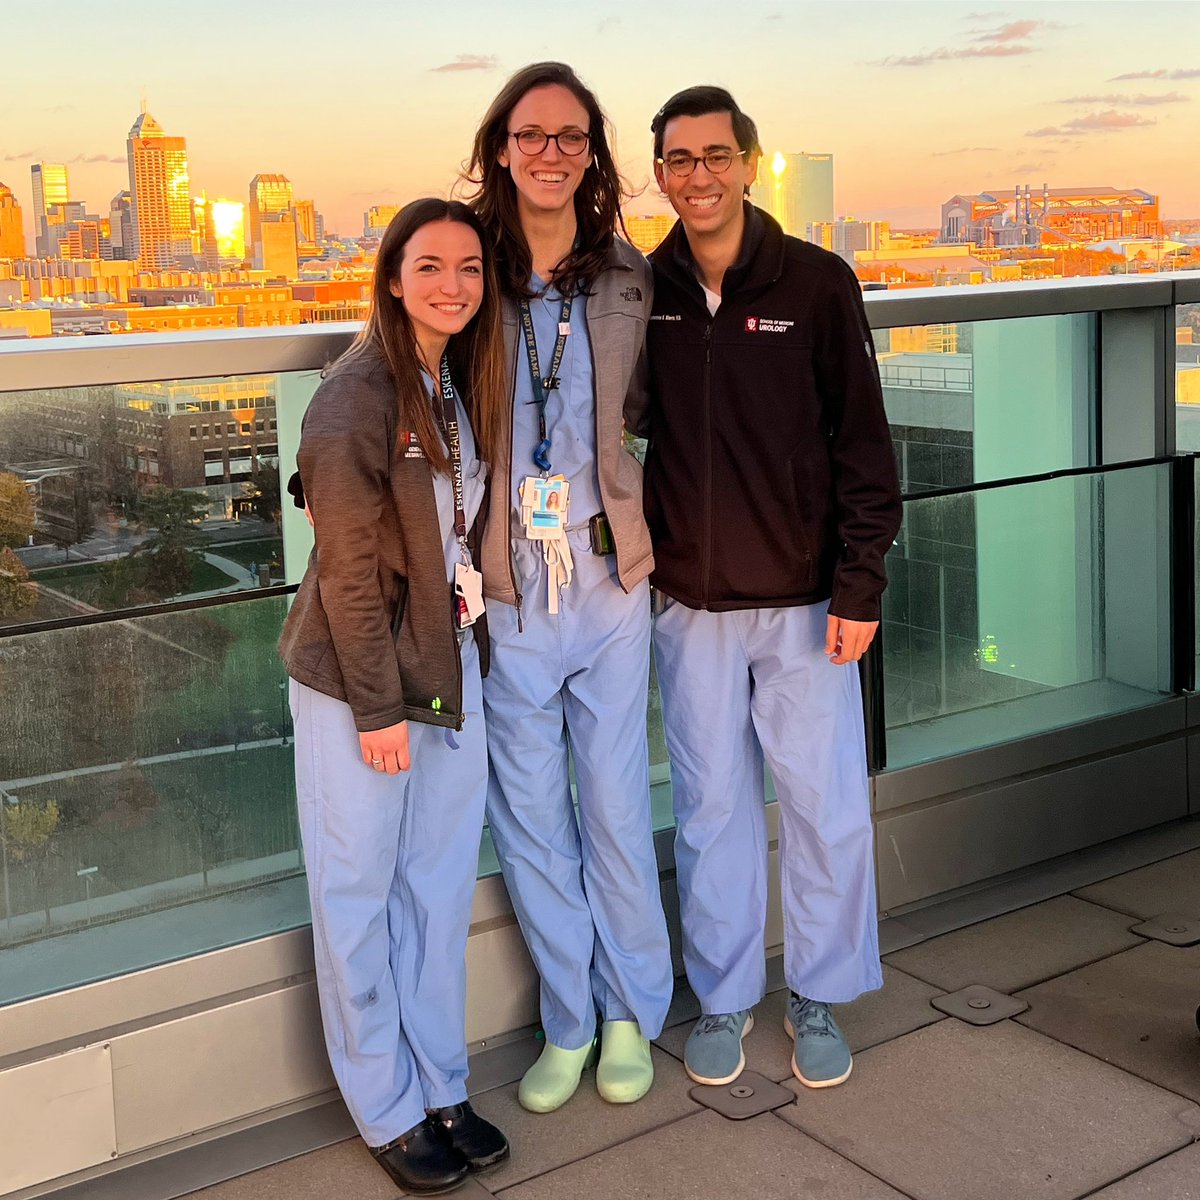 Things that made this past night float month filled with joy: 1. My amazing @IU_Surgery night squad 2. Golden hour at Eskenazi sky garden 3. Taylor swift’s new album on repeat in the work room 😊